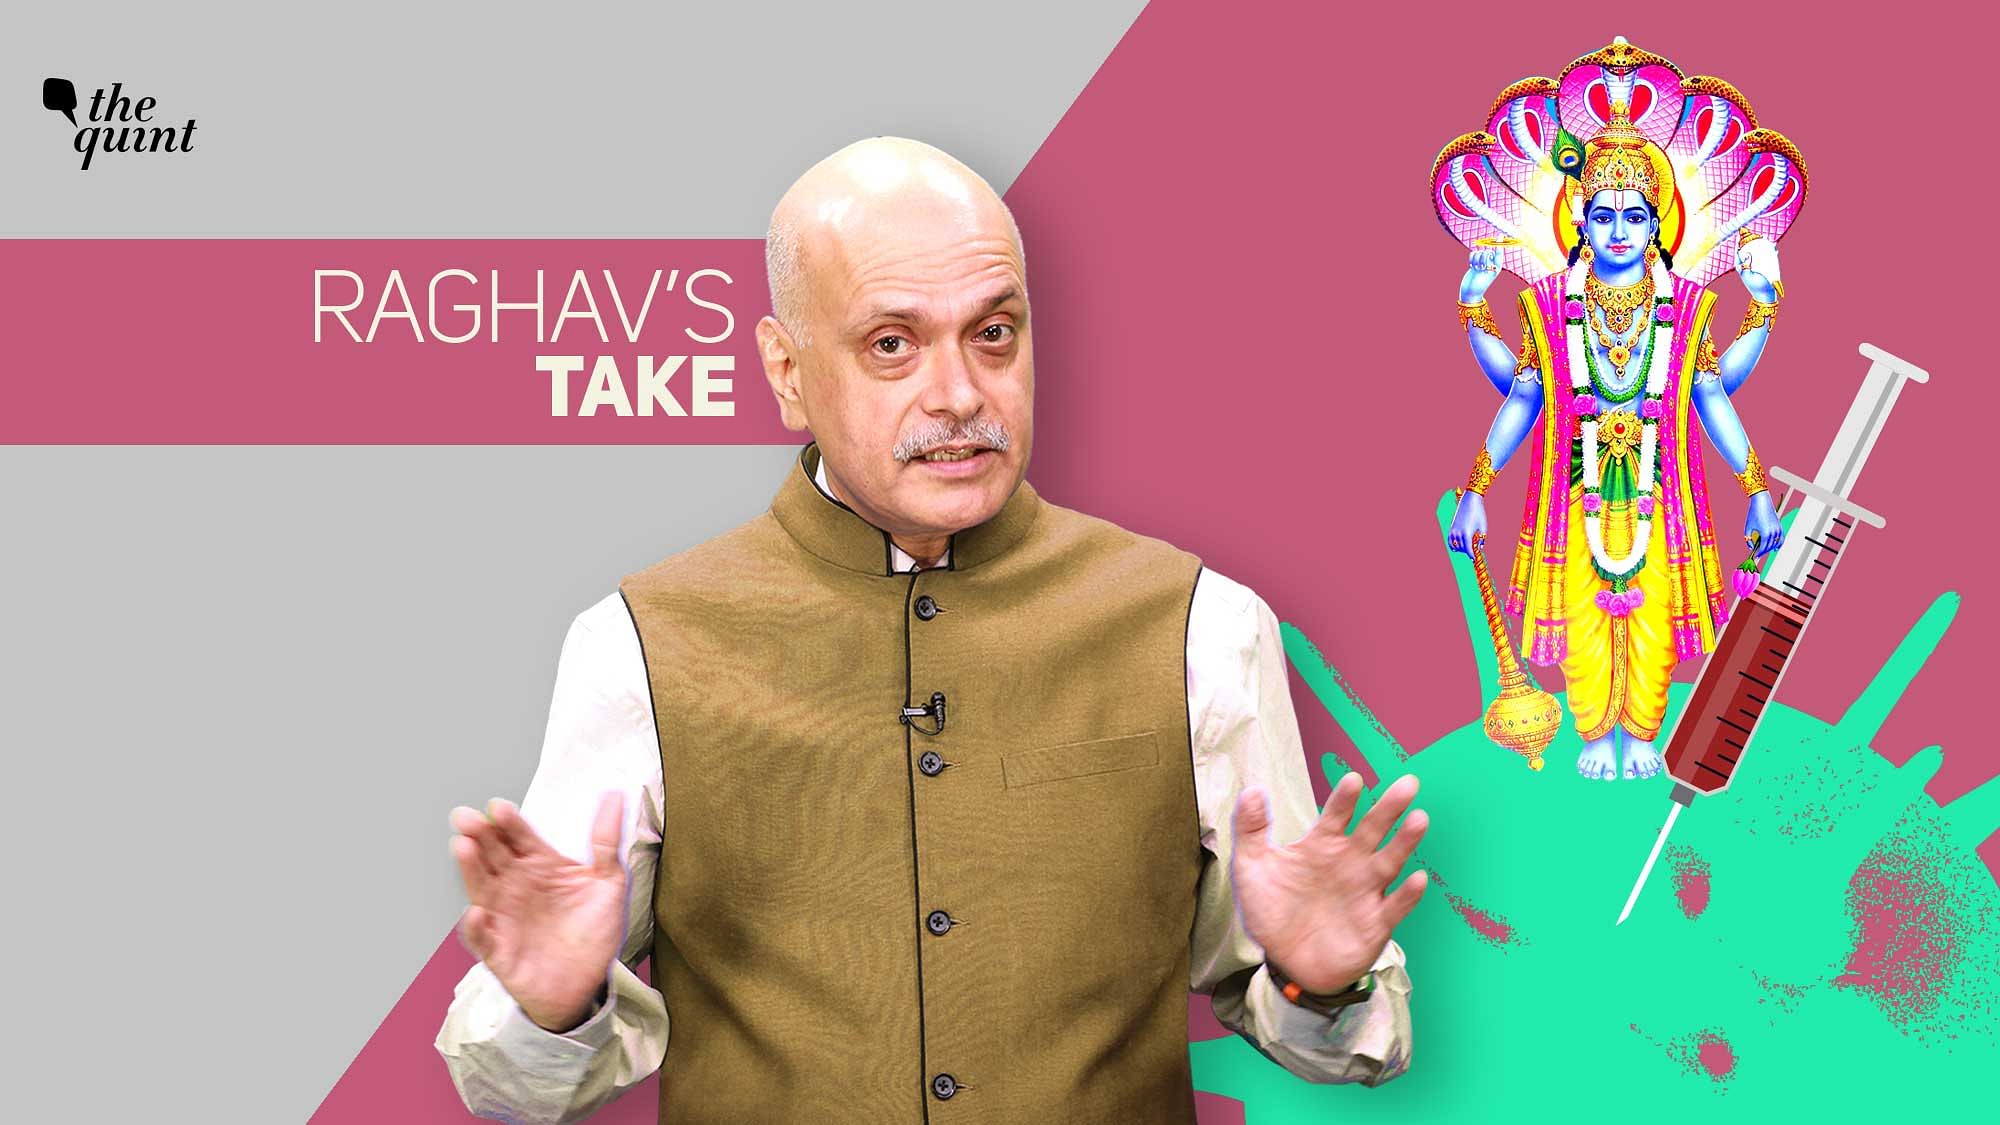 Image of The Quint’s Co-Founder &amp; Editor Raghav Bahl, and an illustration of Lord Vishnu atop the coronavirus, used for representational purposes.